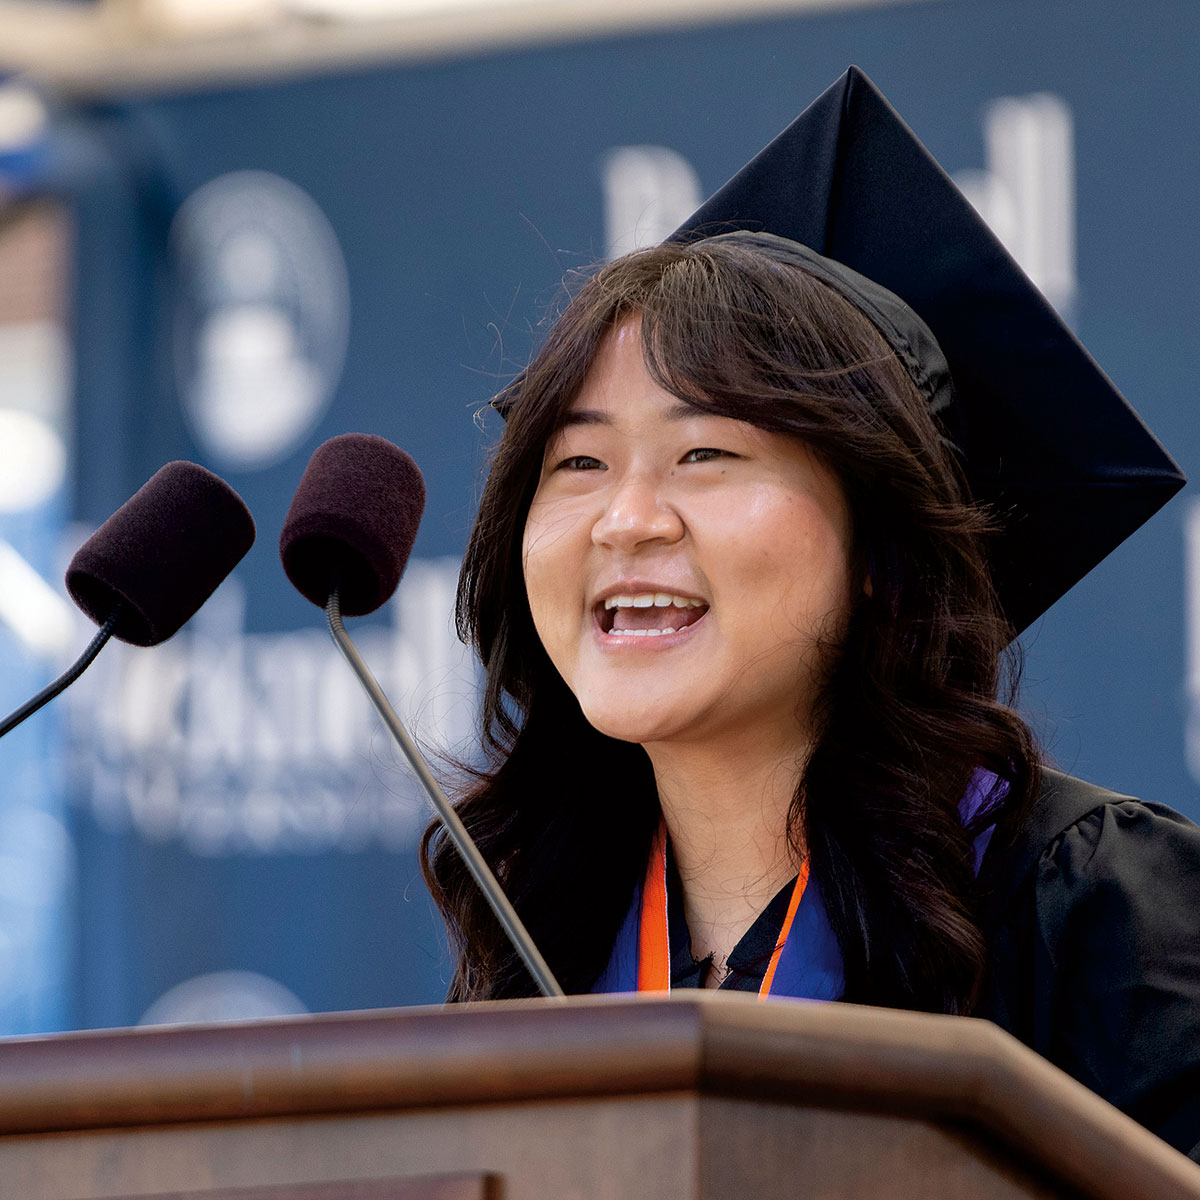 Ruby Lee ’21 in a graduation cap and gown giving her speech at at Bucknell’s 171st Commencement